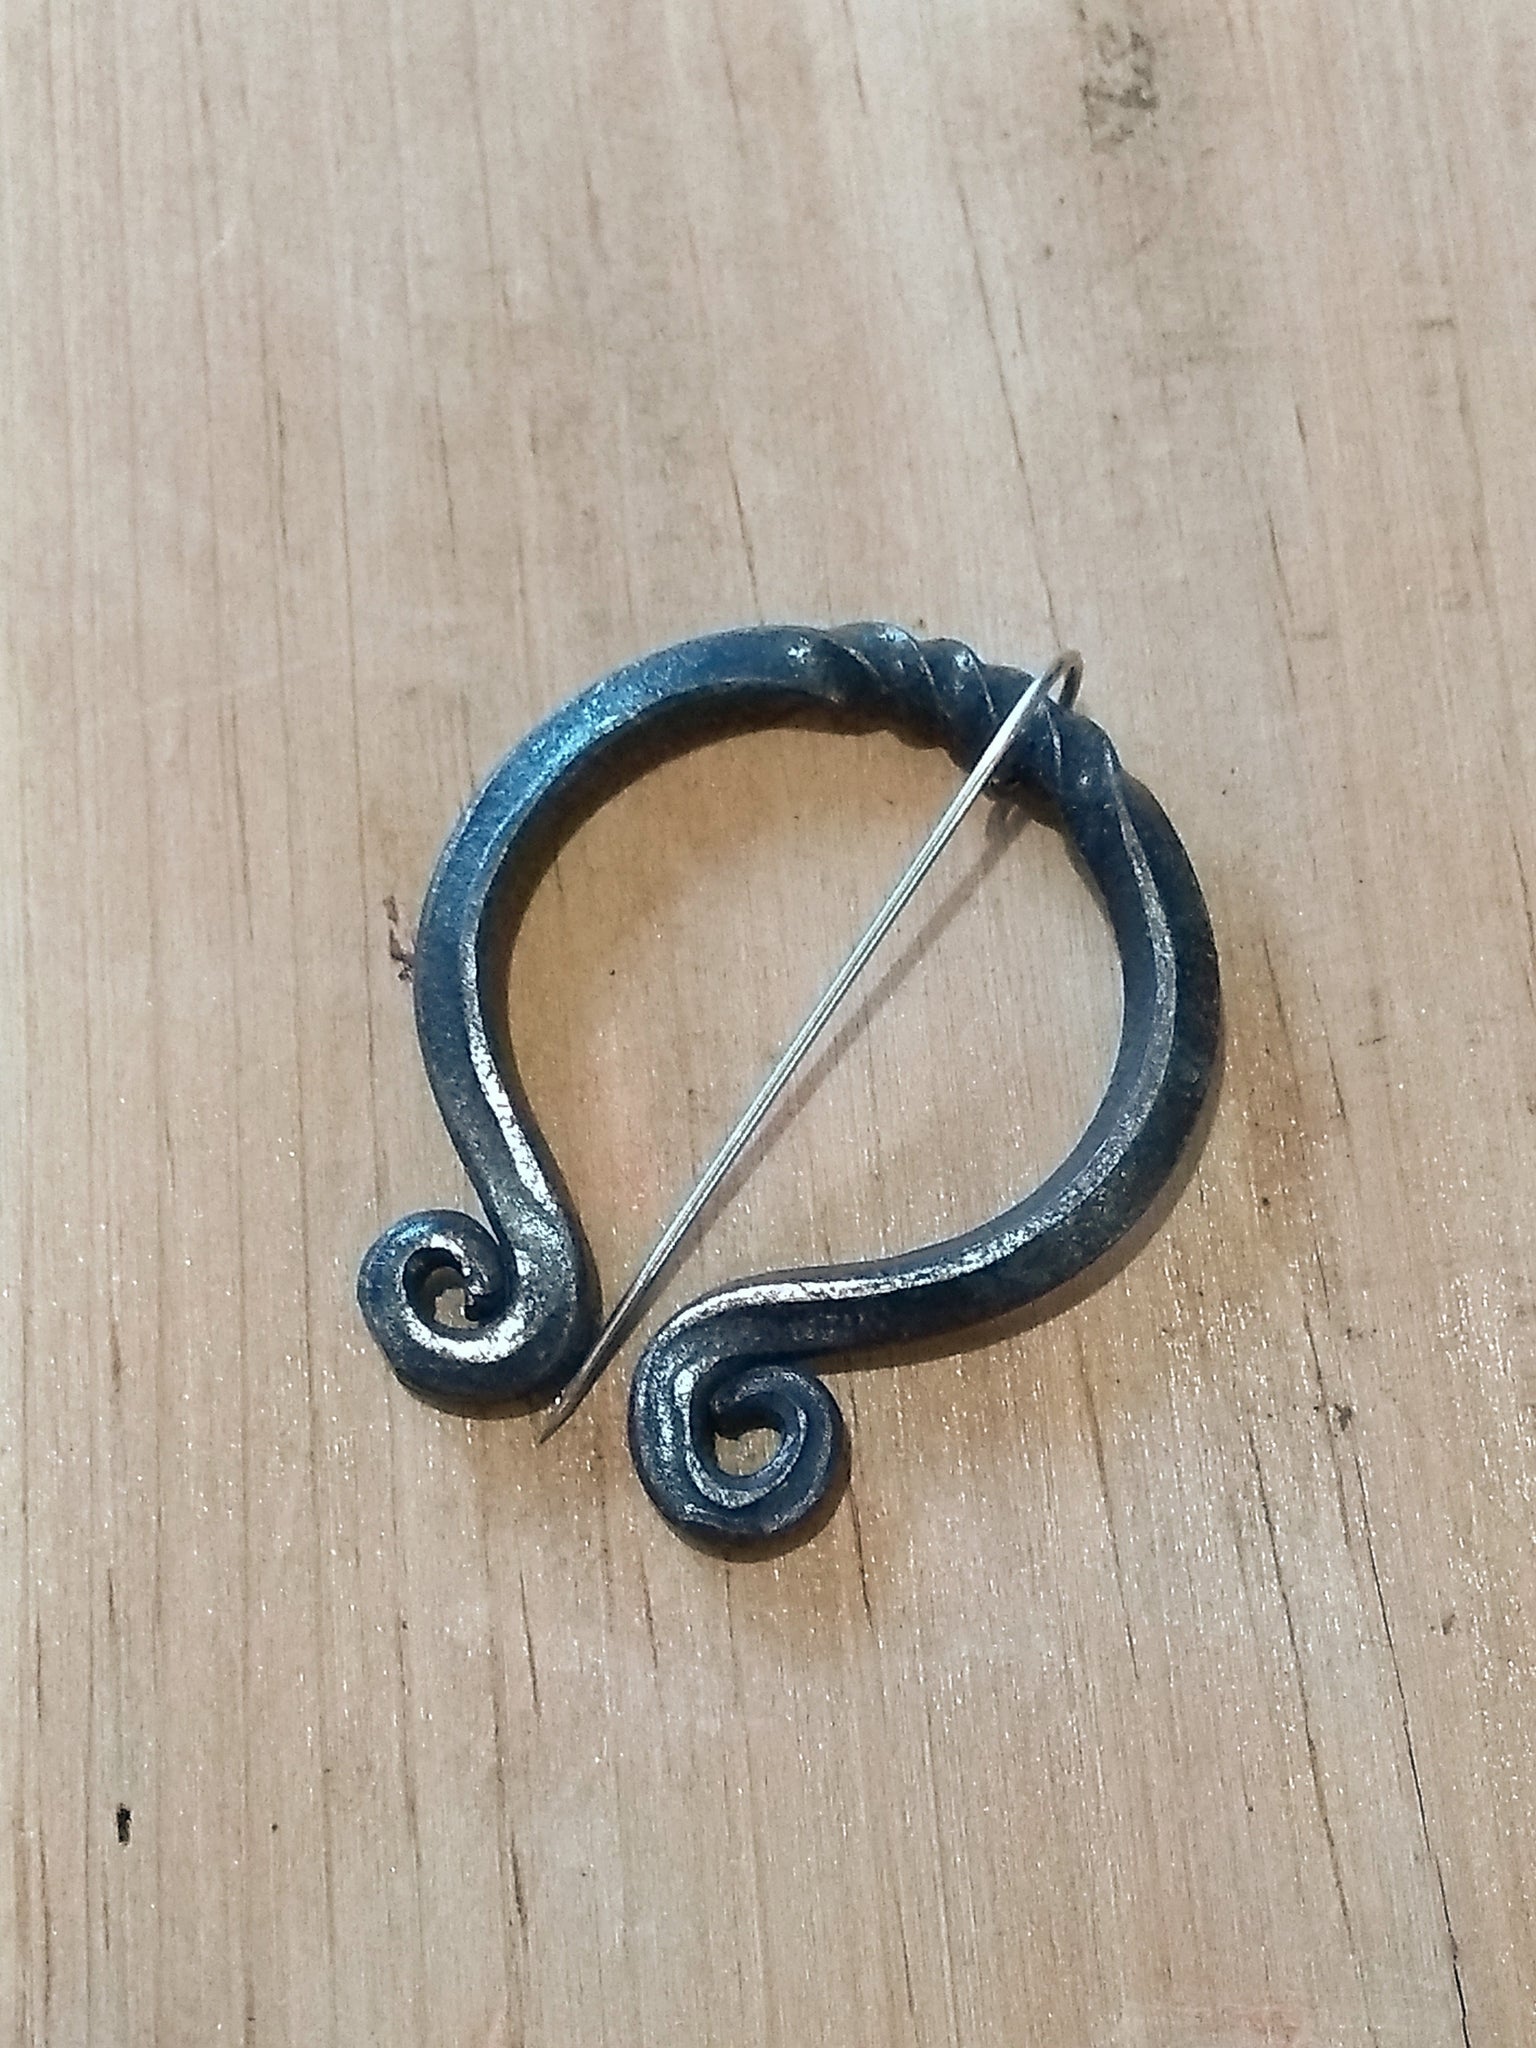 Small Brass Cloak Pin - Medieval Collectibles